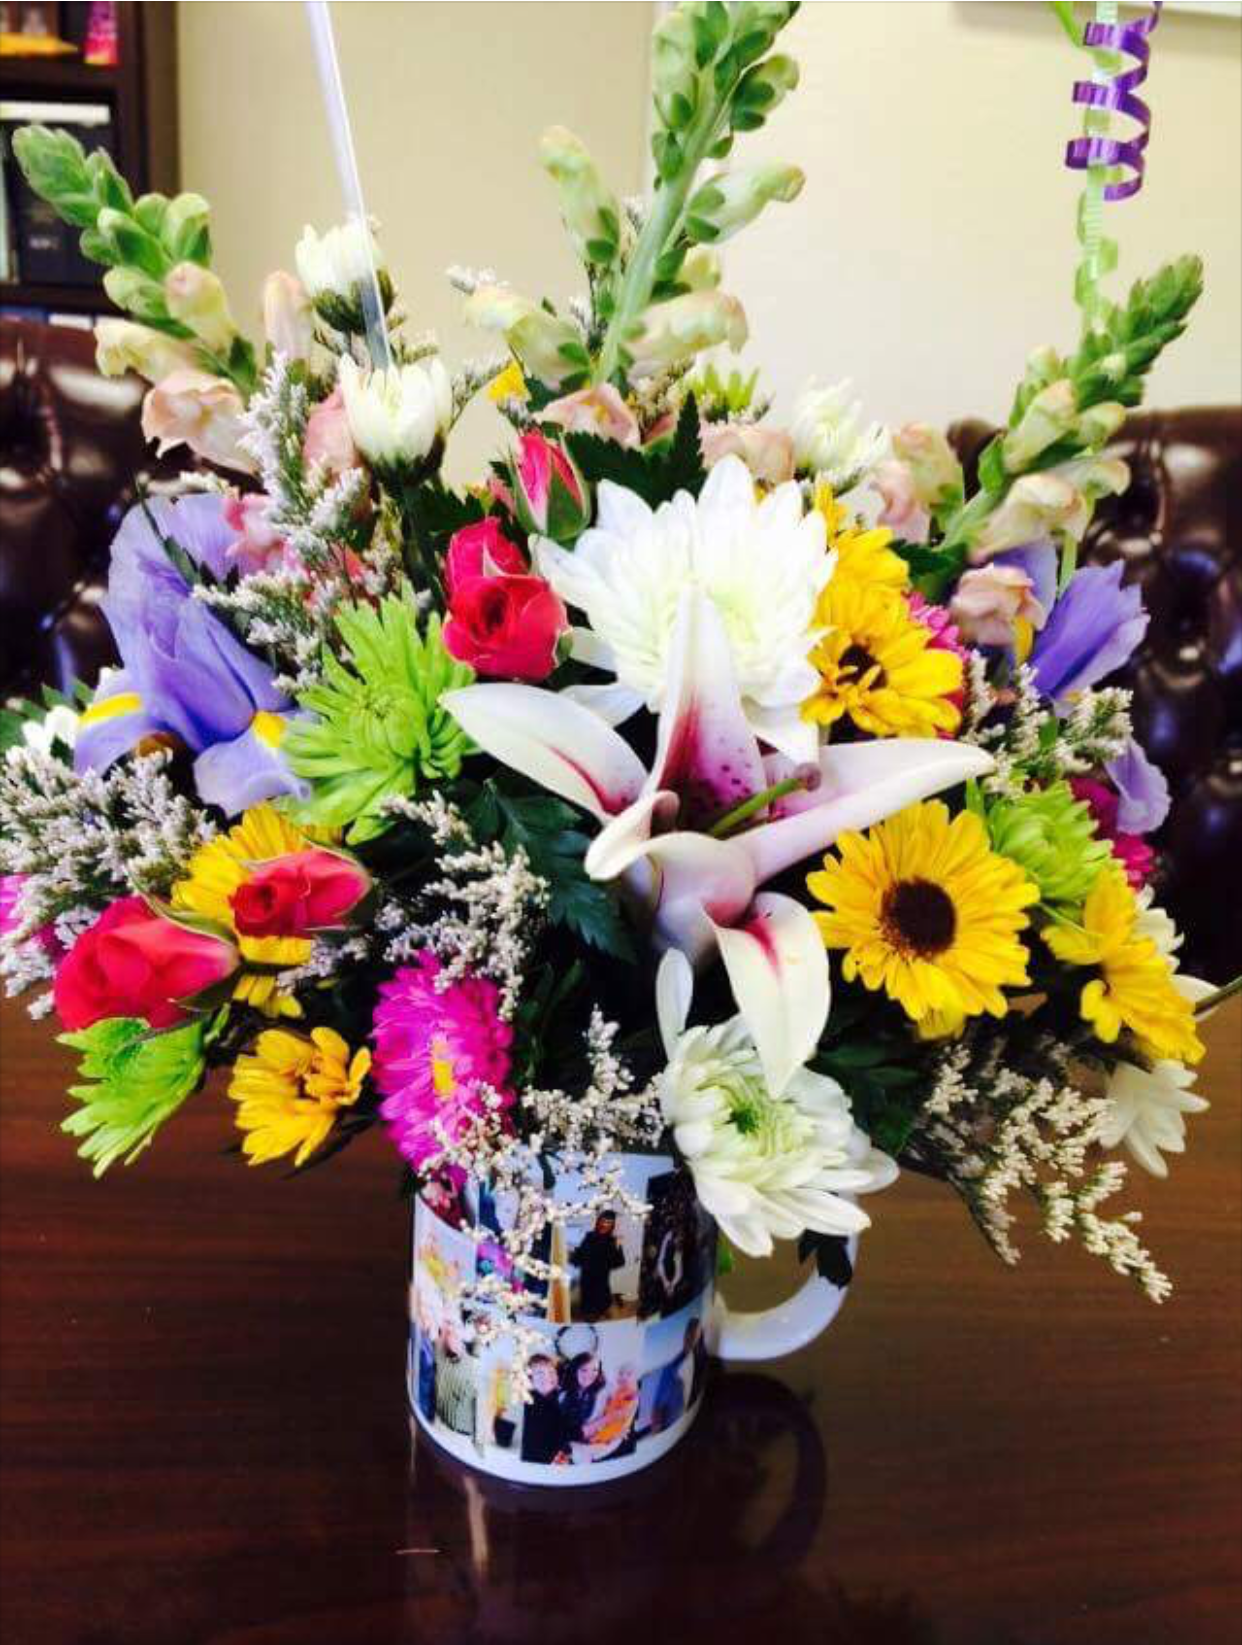 Personalized flowers made with sublimation printing